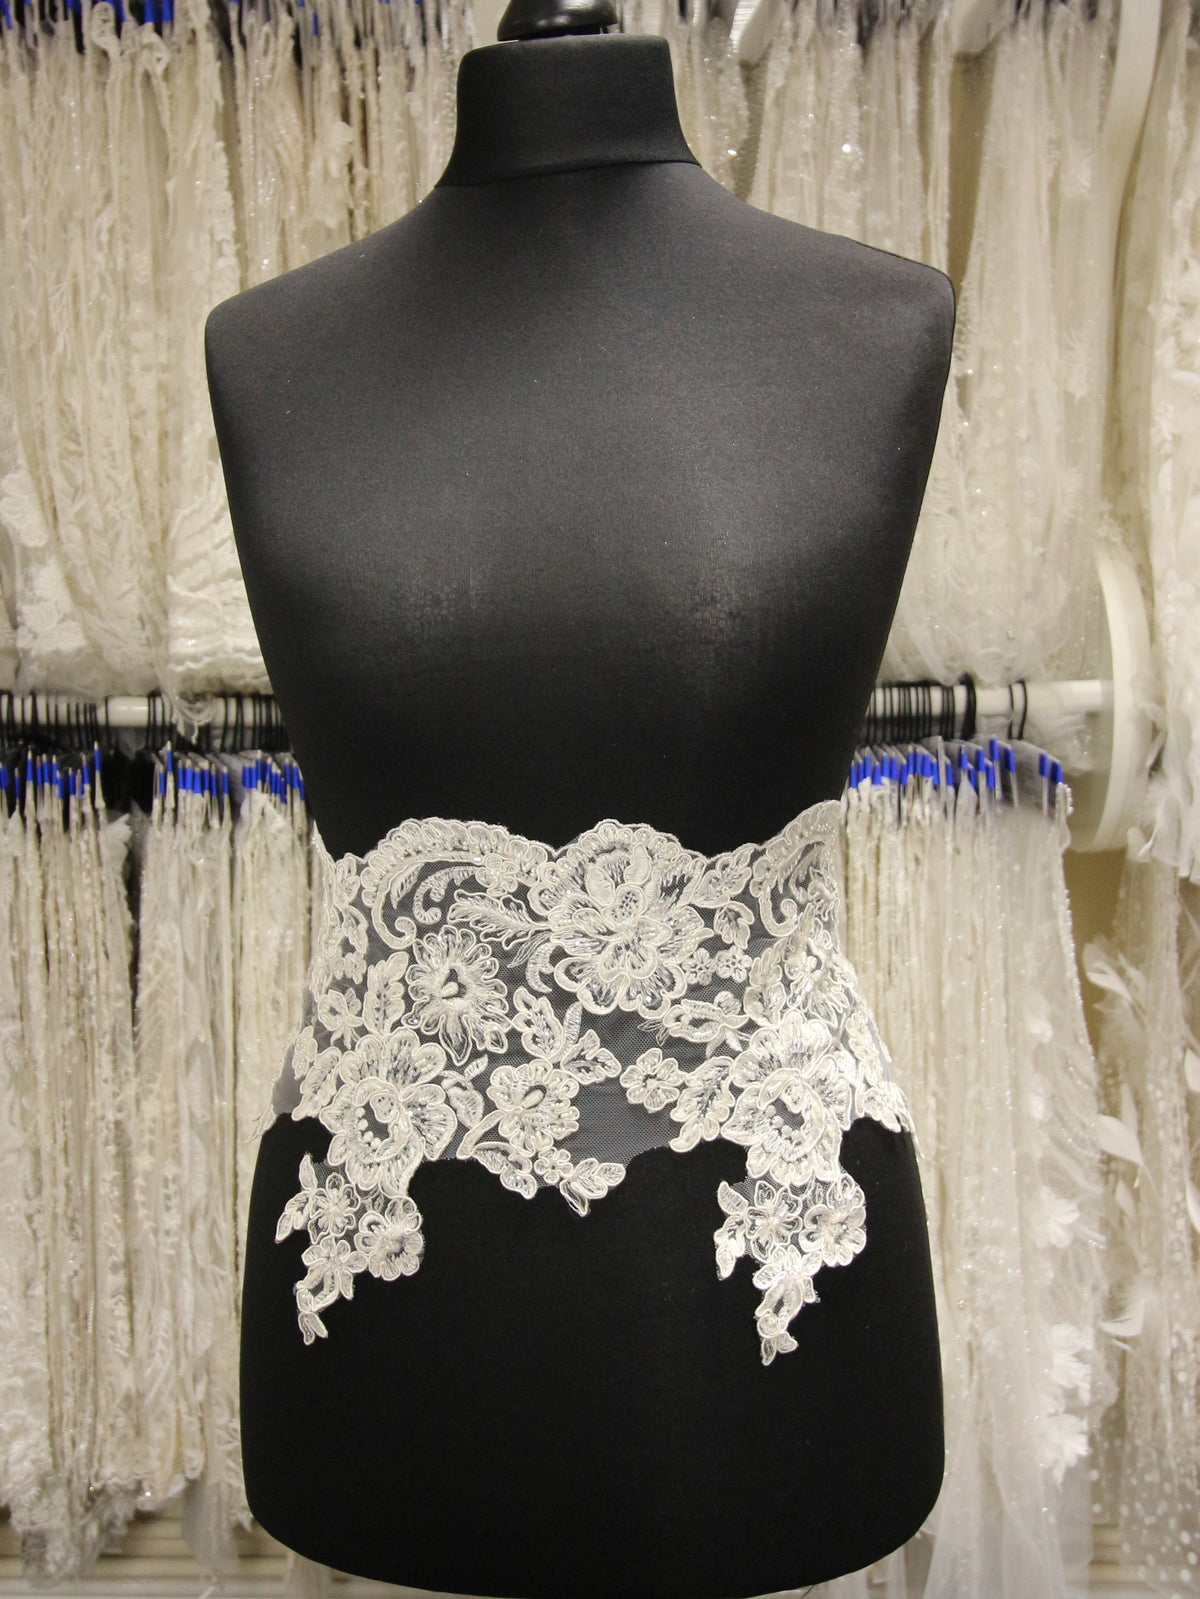 Ivory Beaded & Corded Lace Trim - Victoria